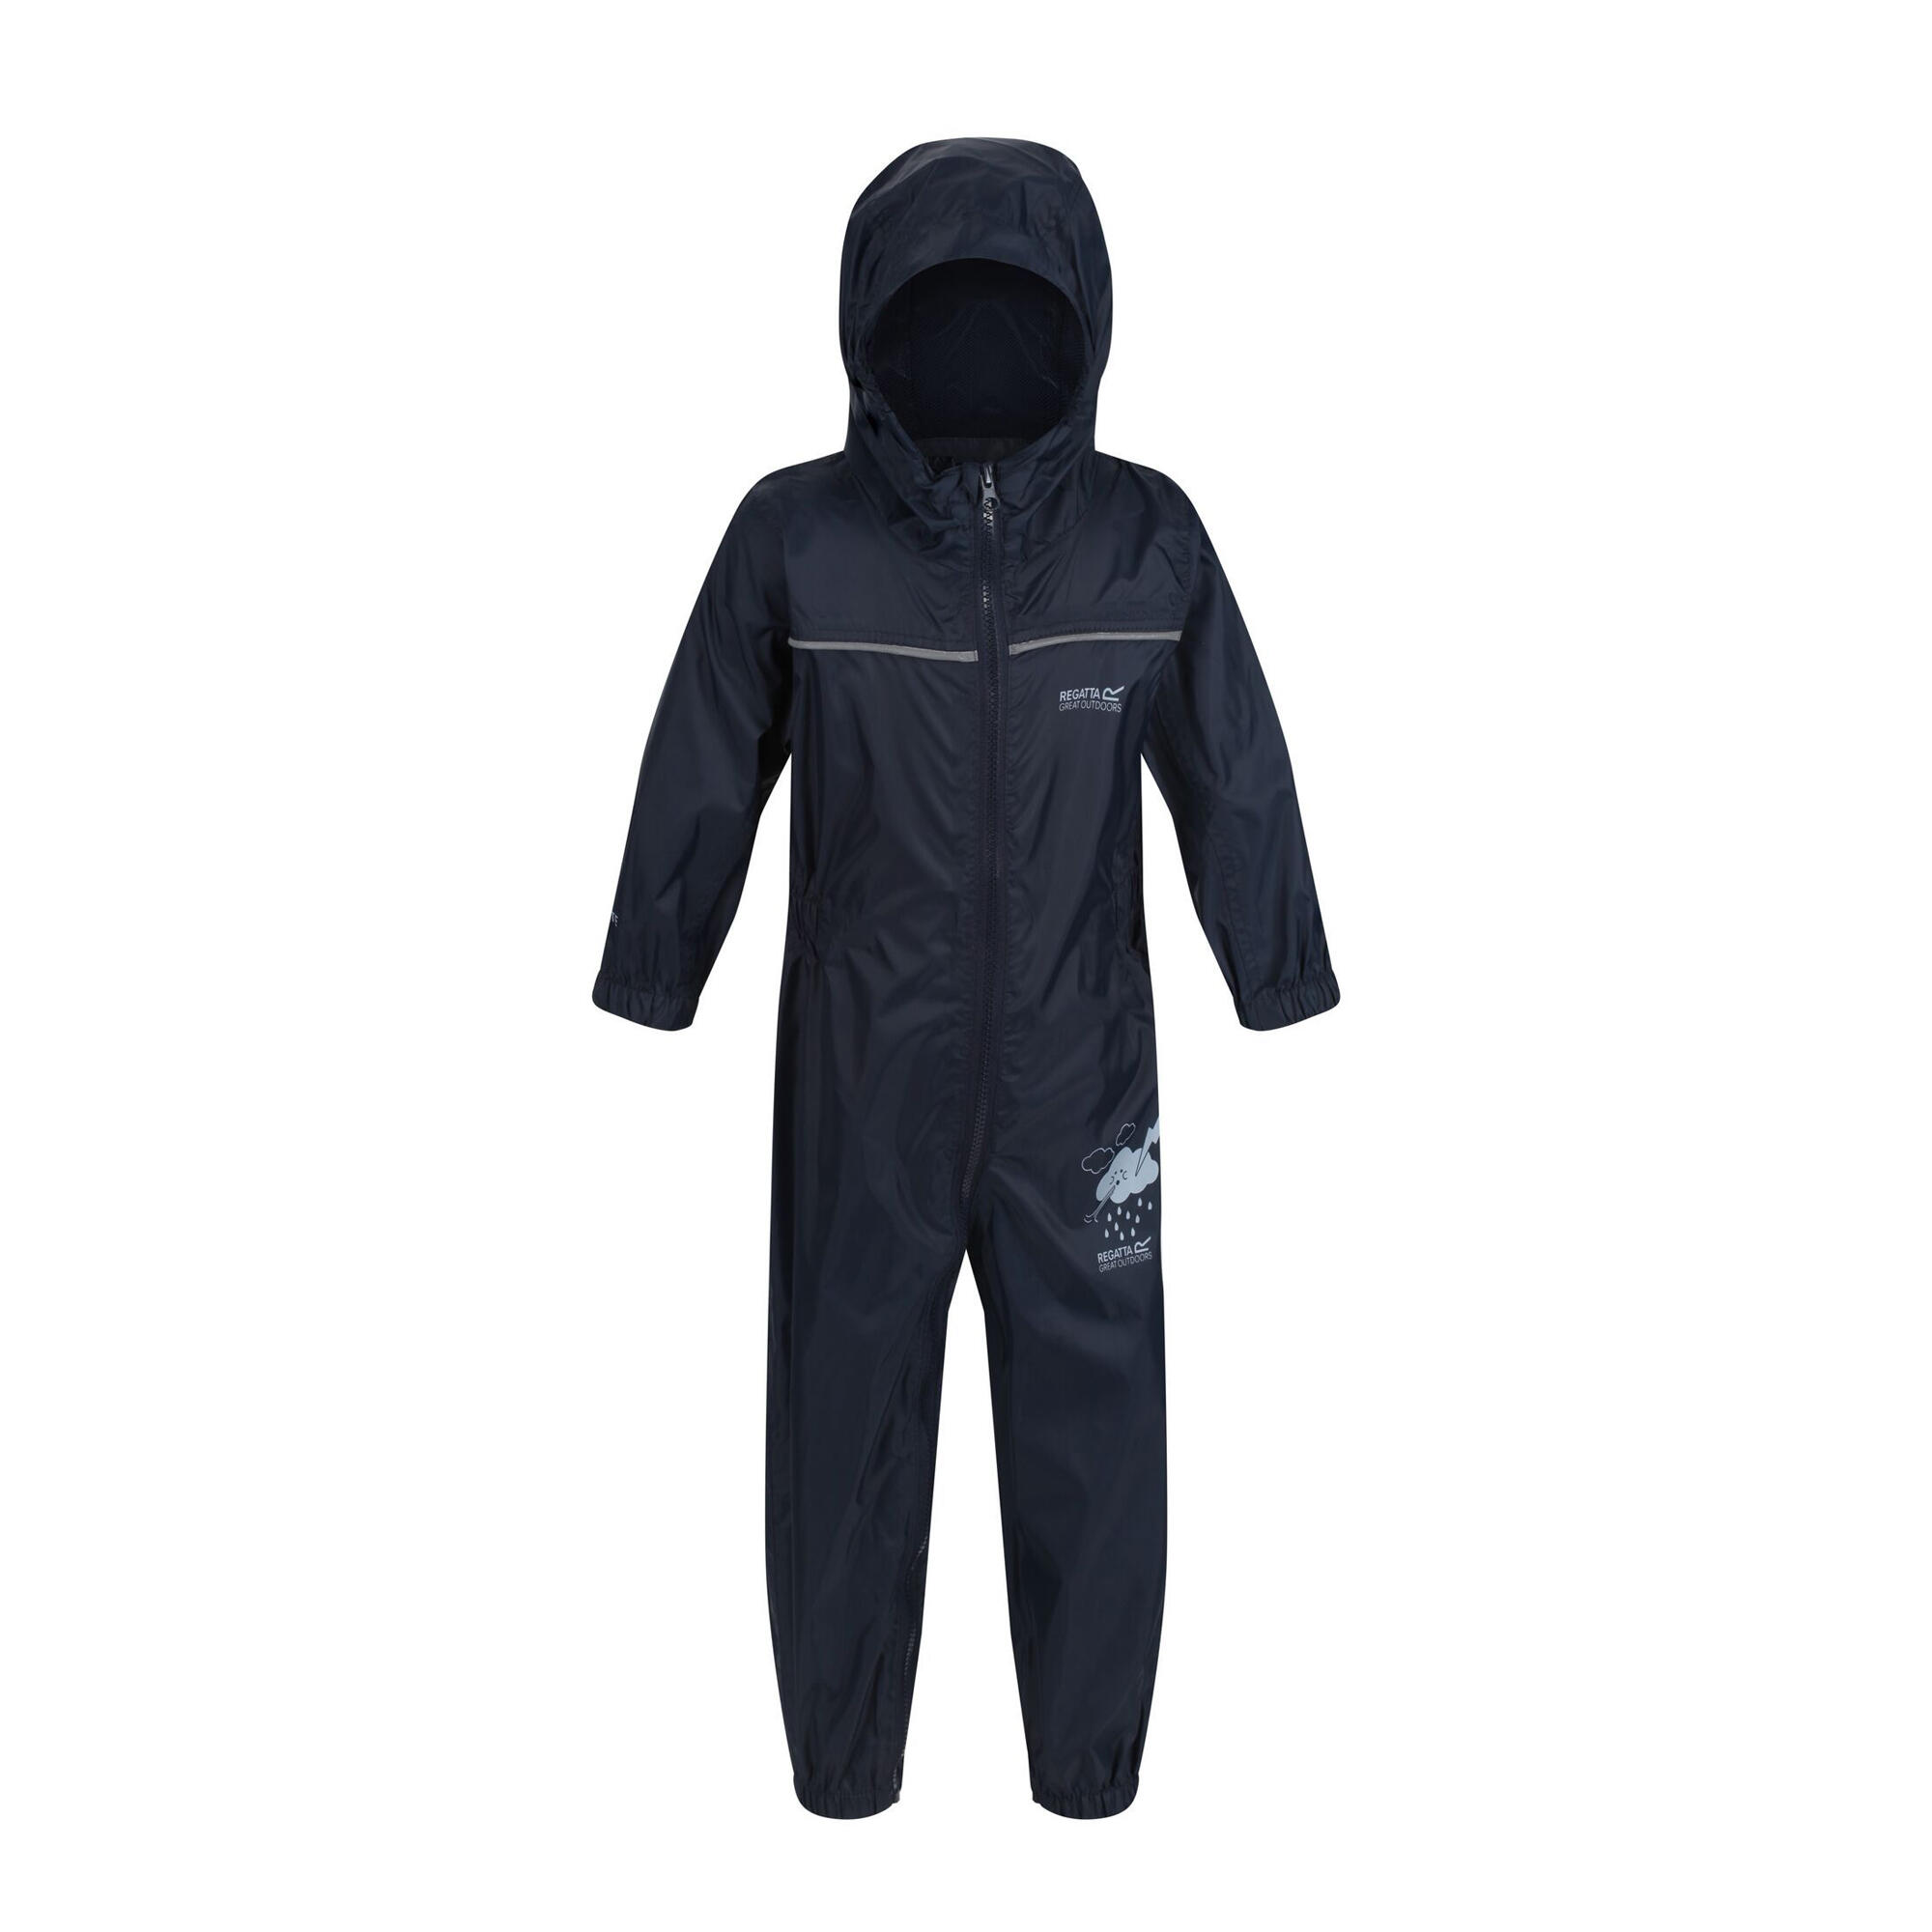 REGATTA Great Outdoors Childrens Toddlers Puddle IV Waterproof Rainsuit (Navy)